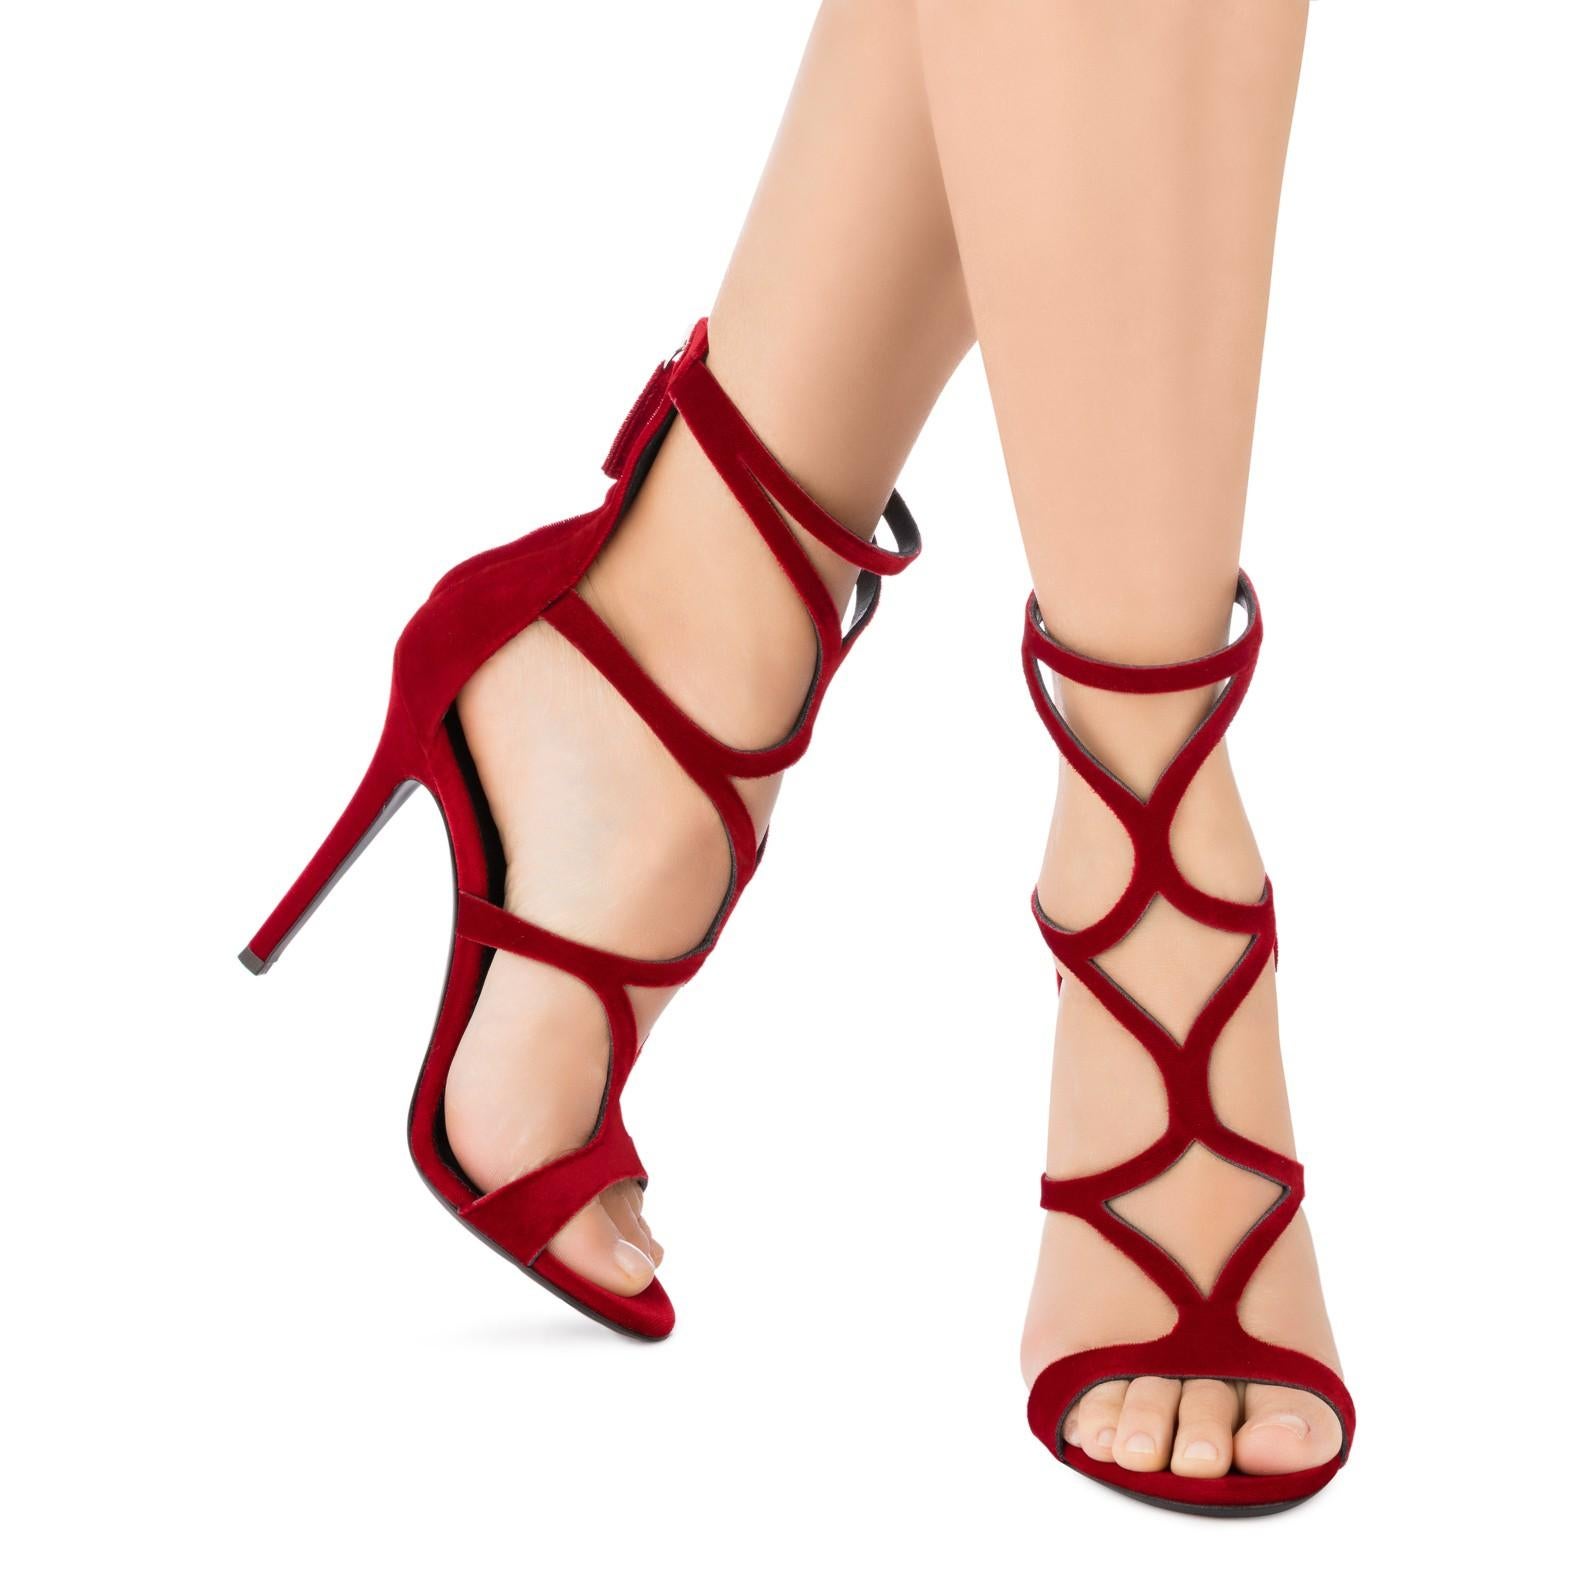 Giuseppe Zanotti NEW Red Velvet Strappy Evening Sandals Heels in Box

Size IT 36
Velvet
Ankle zip closure
Made in Italy
Heels height 4.5